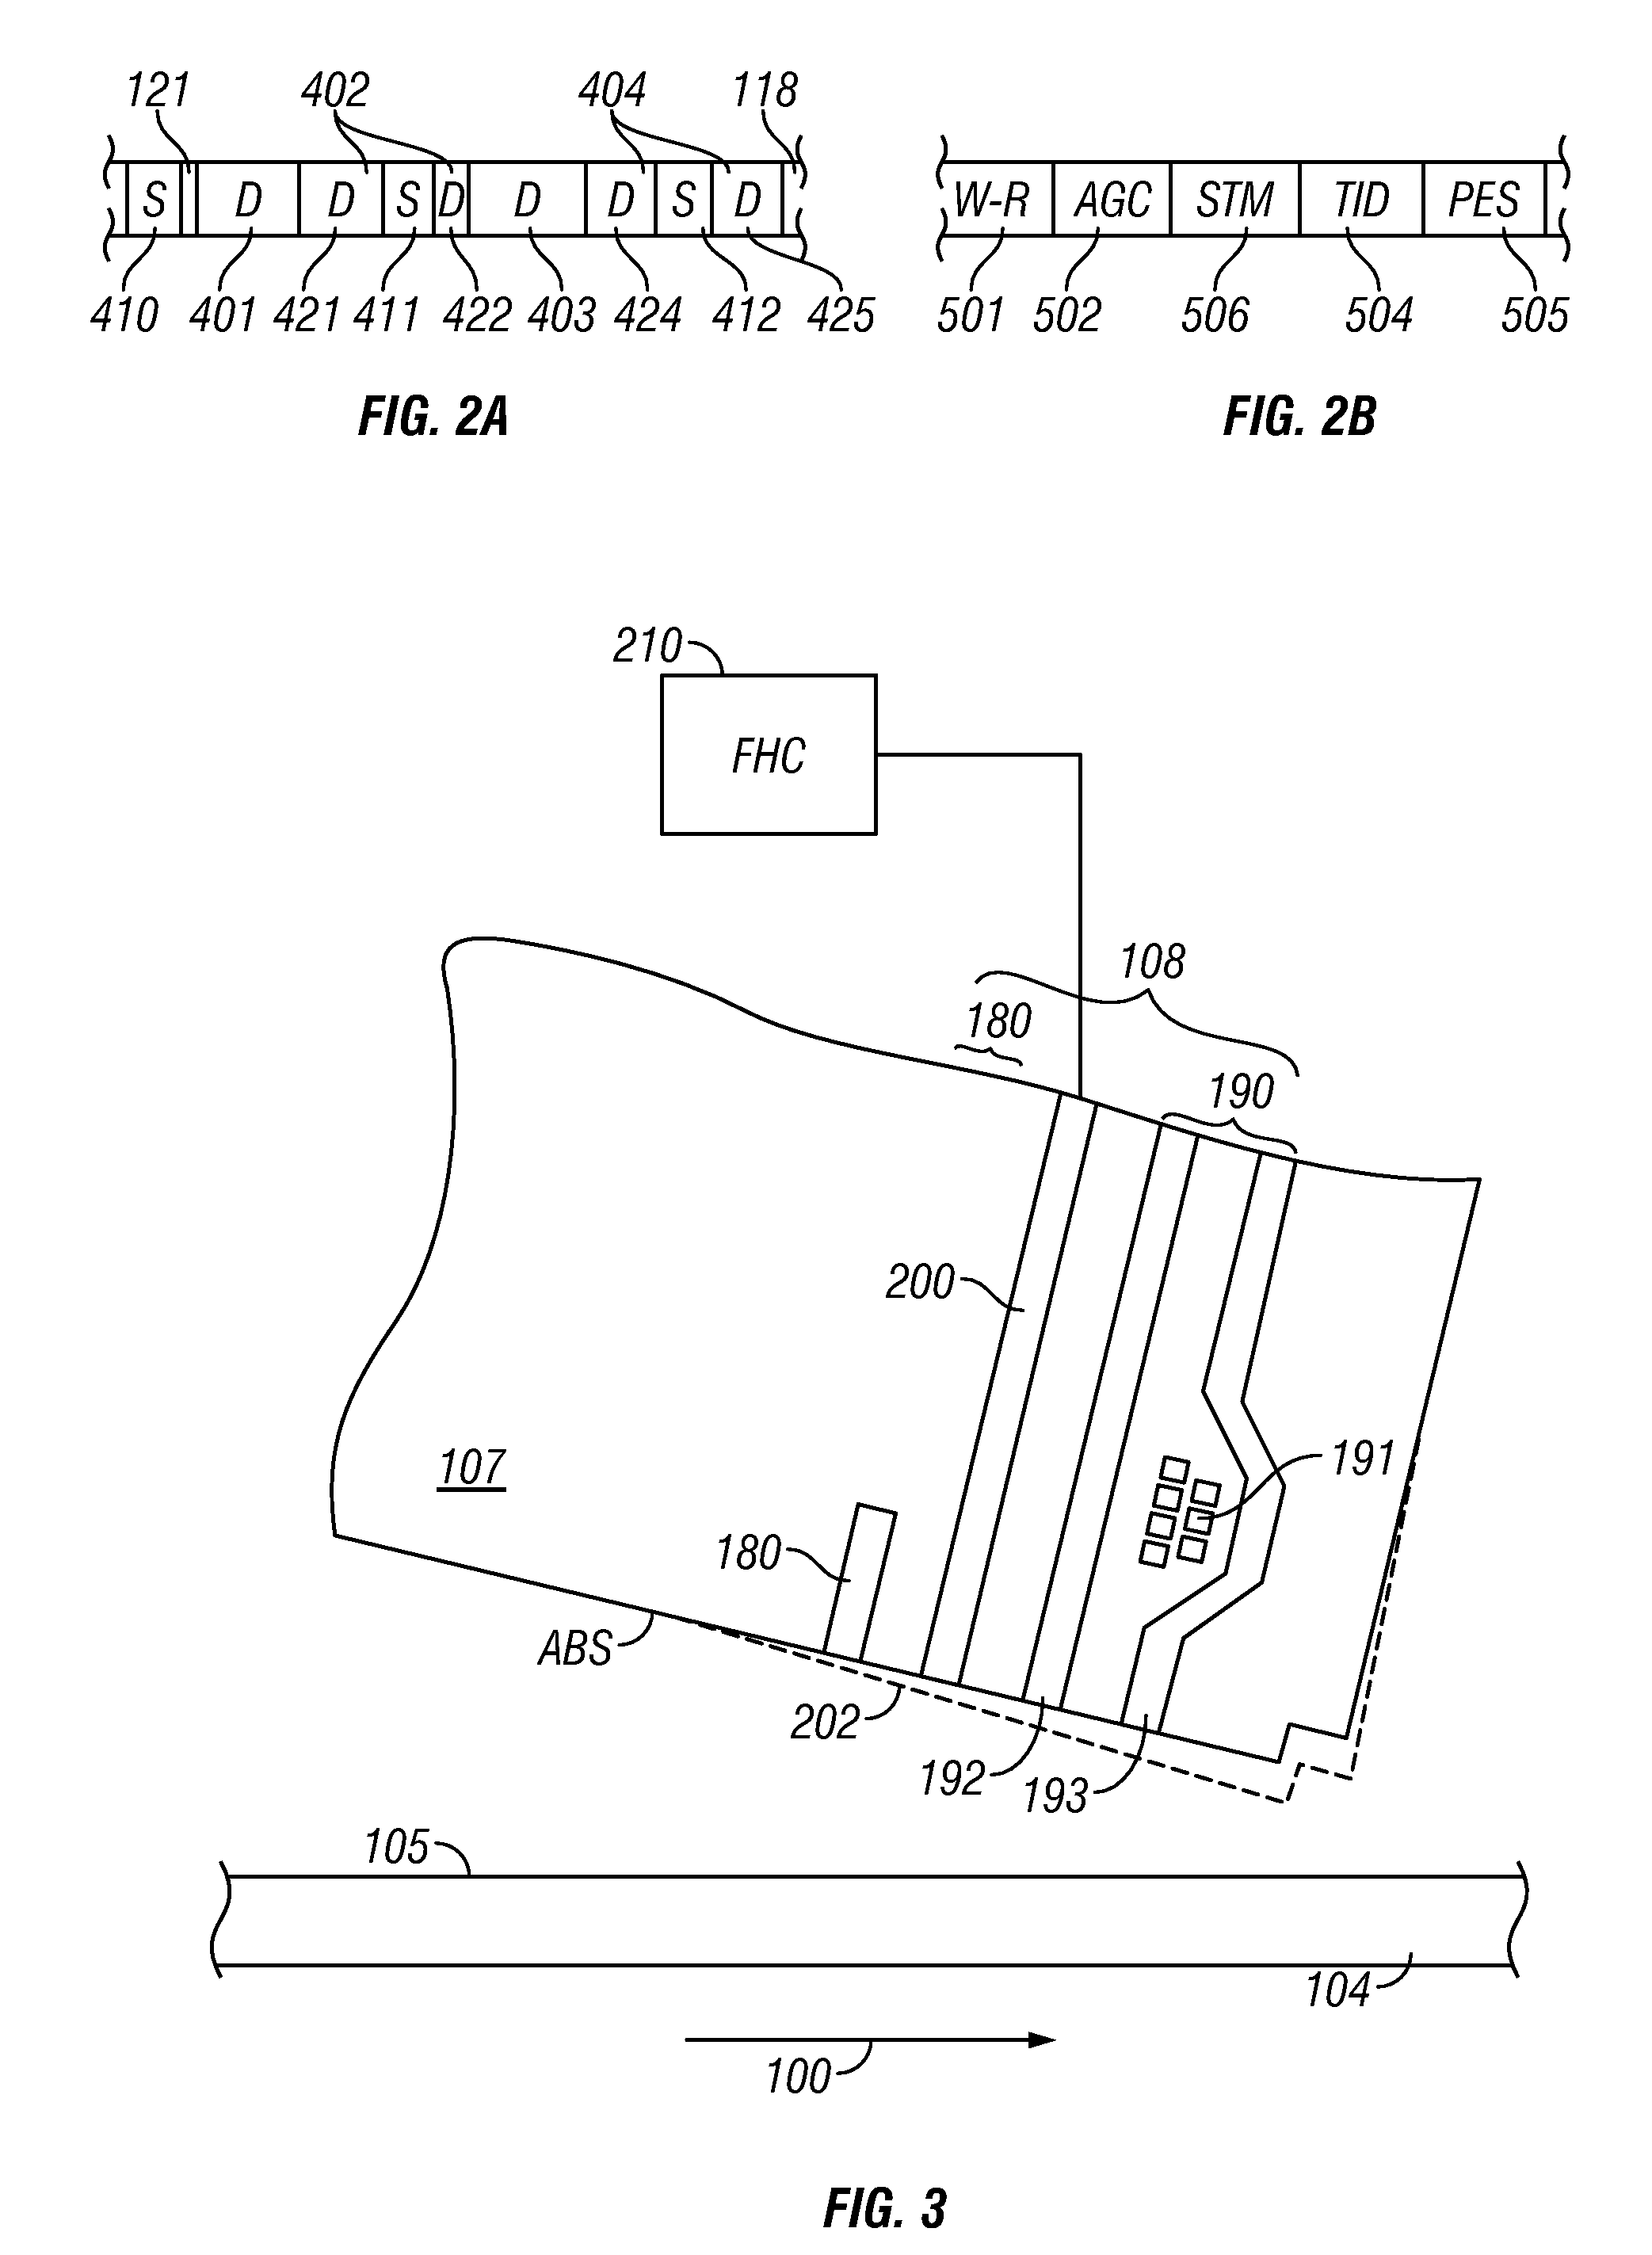 Disk drive with improved method for operating a thermal head fly-height actuator